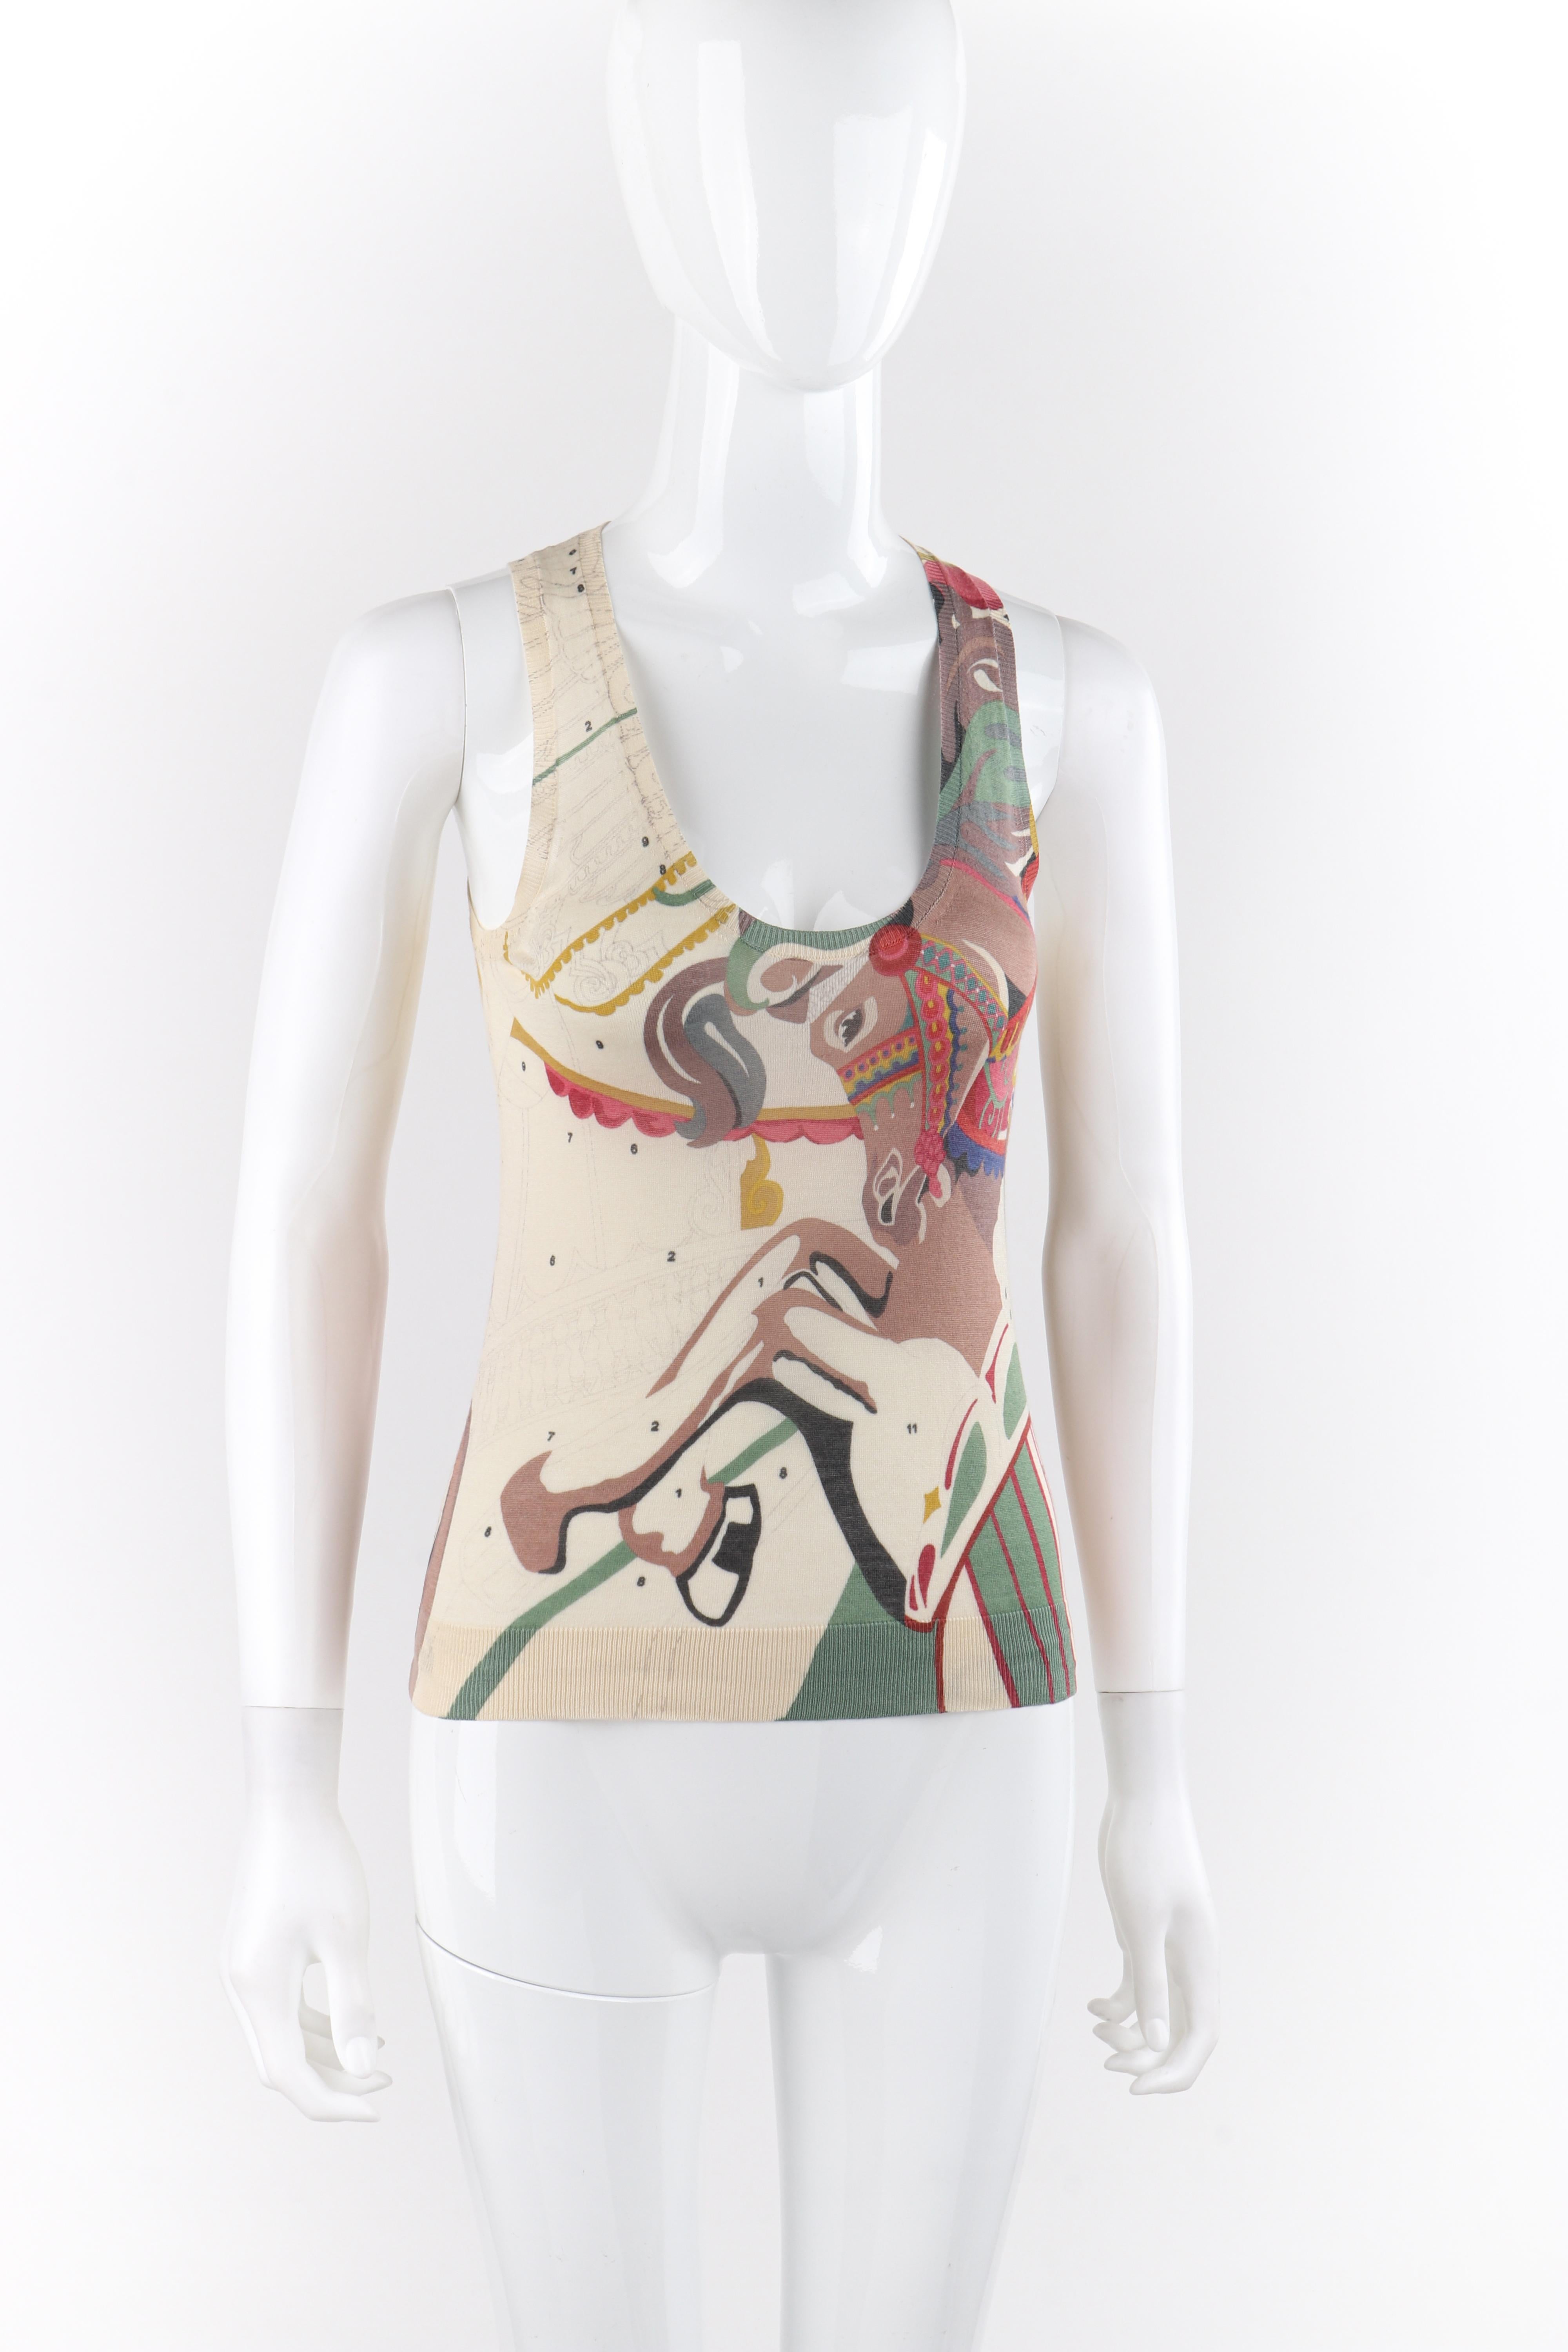 Beige ALEXANDER McQUEEN S/S 2005 “It's Only a Game” Carousel Horse Sleeveless Knit Top